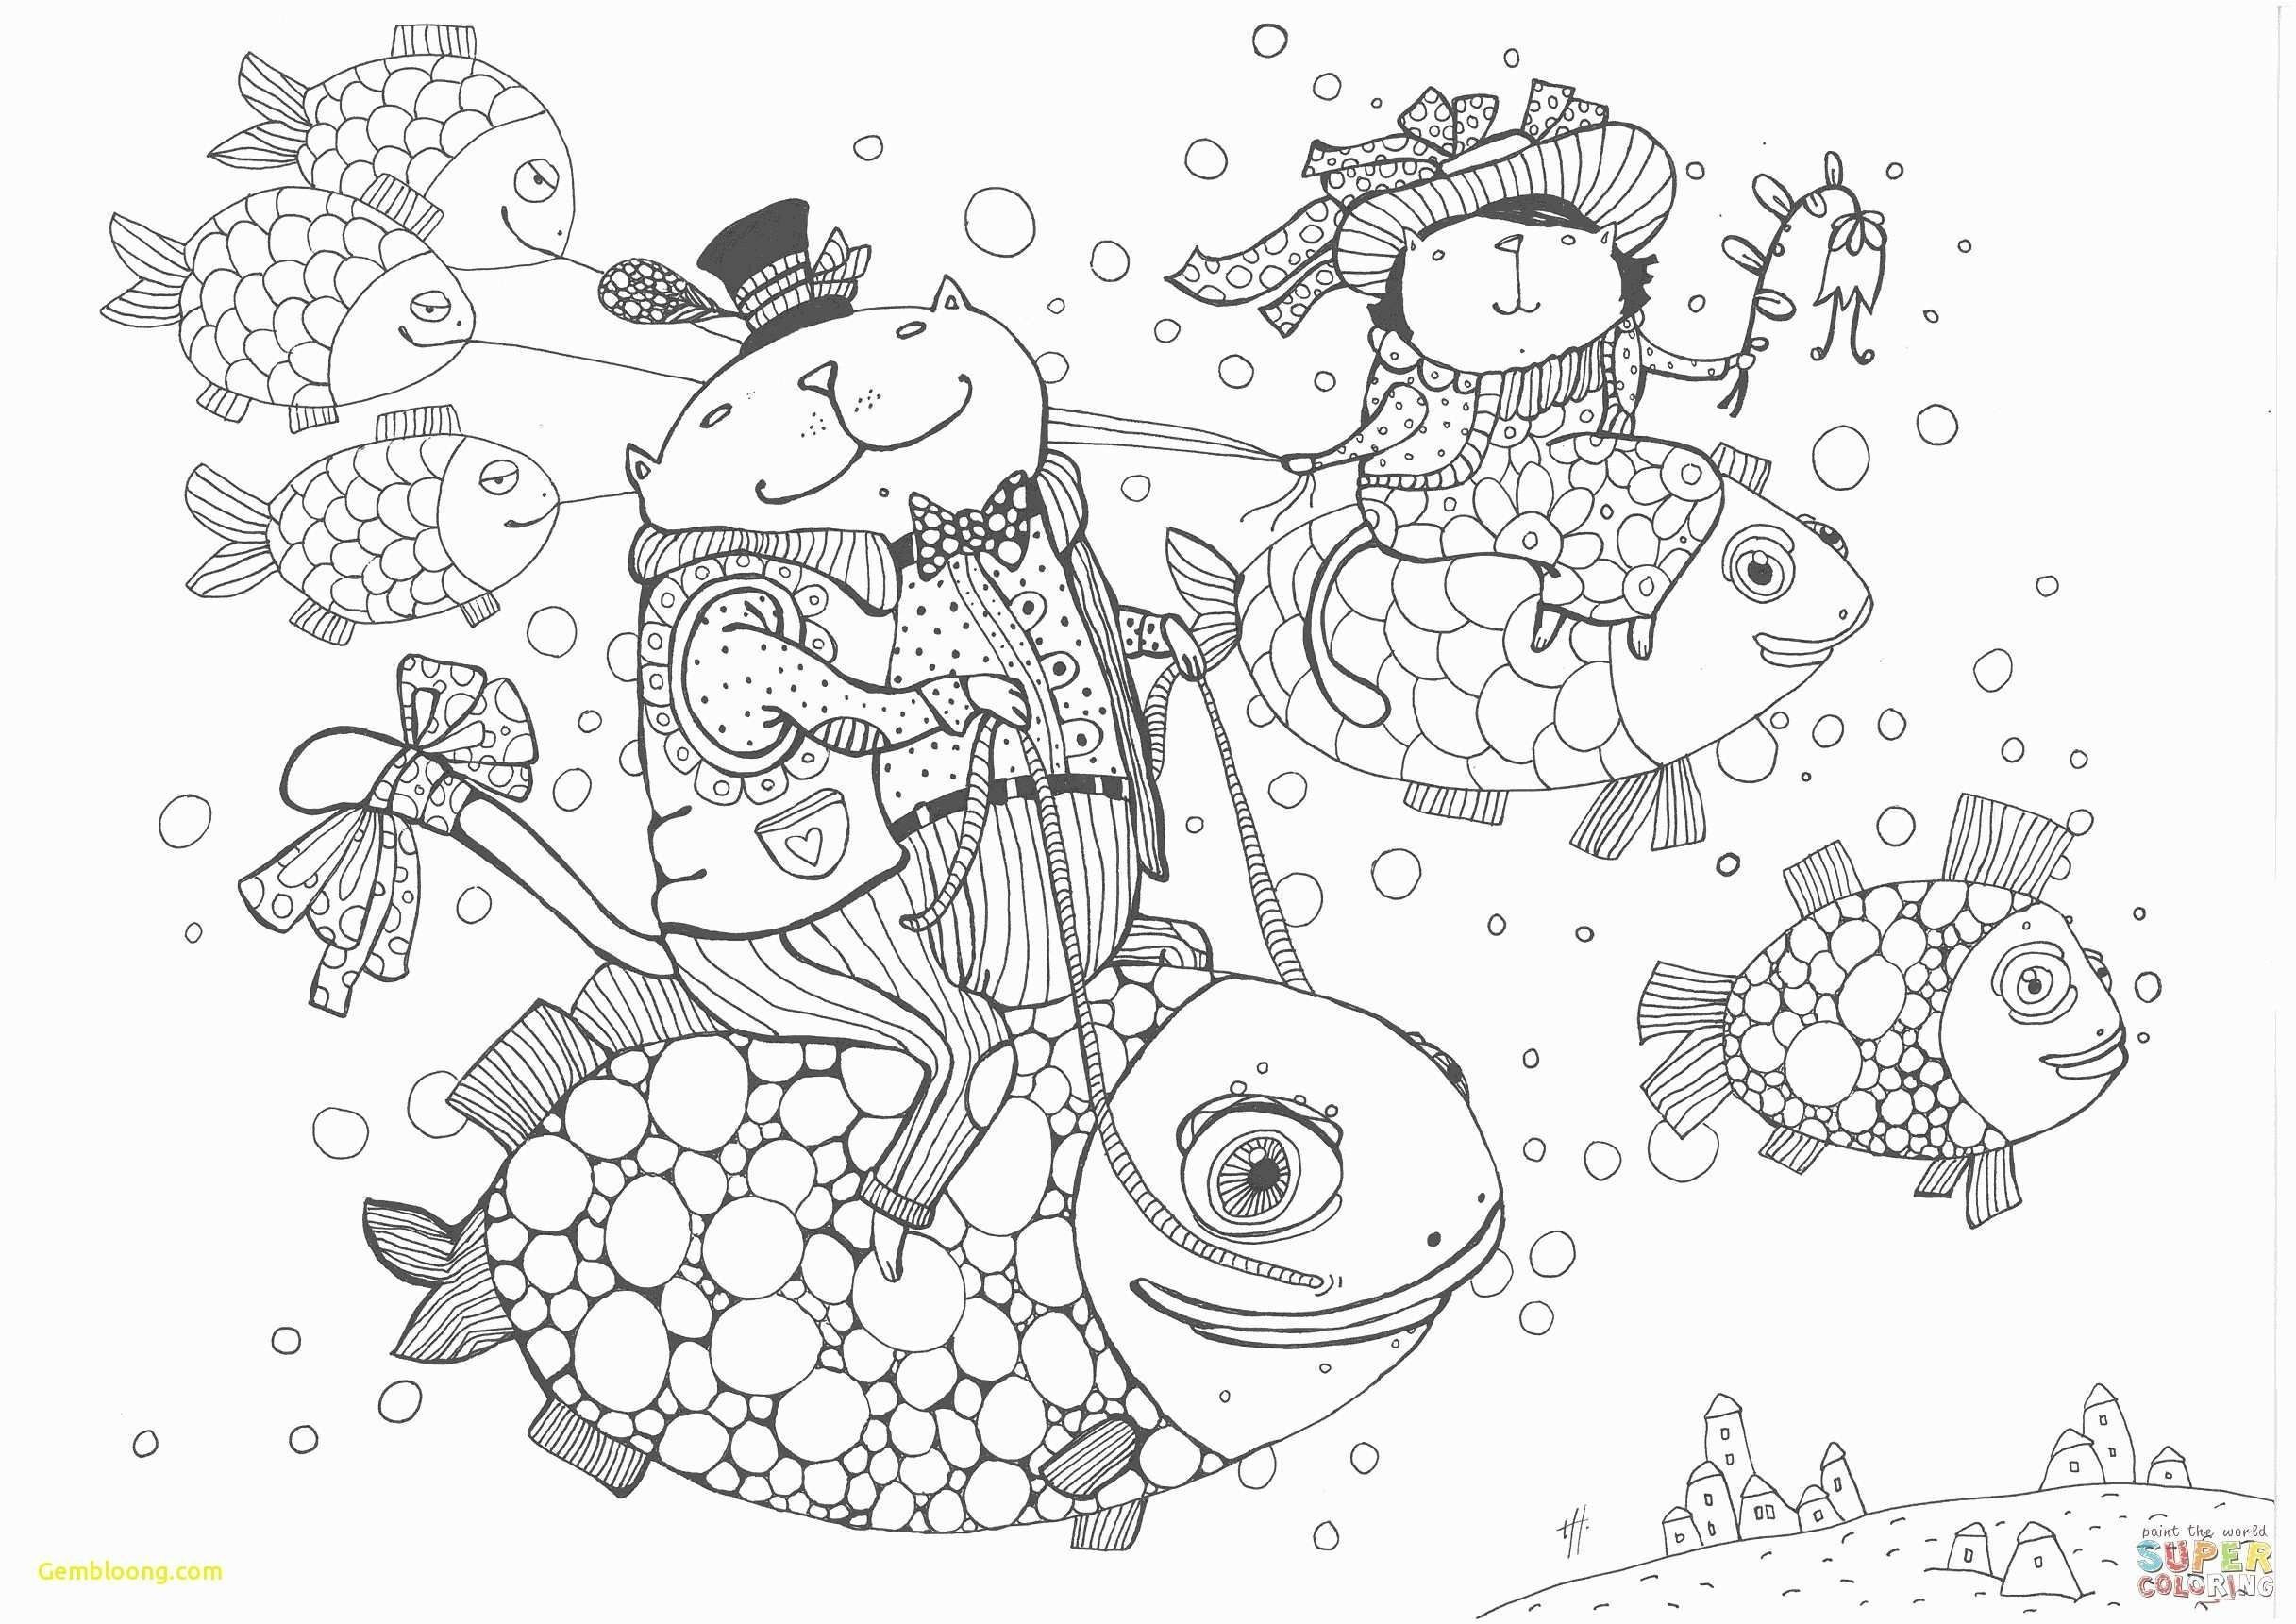 Coloring Pages For Elementary Students Dltk Halloween Coloring Pages Lovely Luxury Halloween Coloring Pages